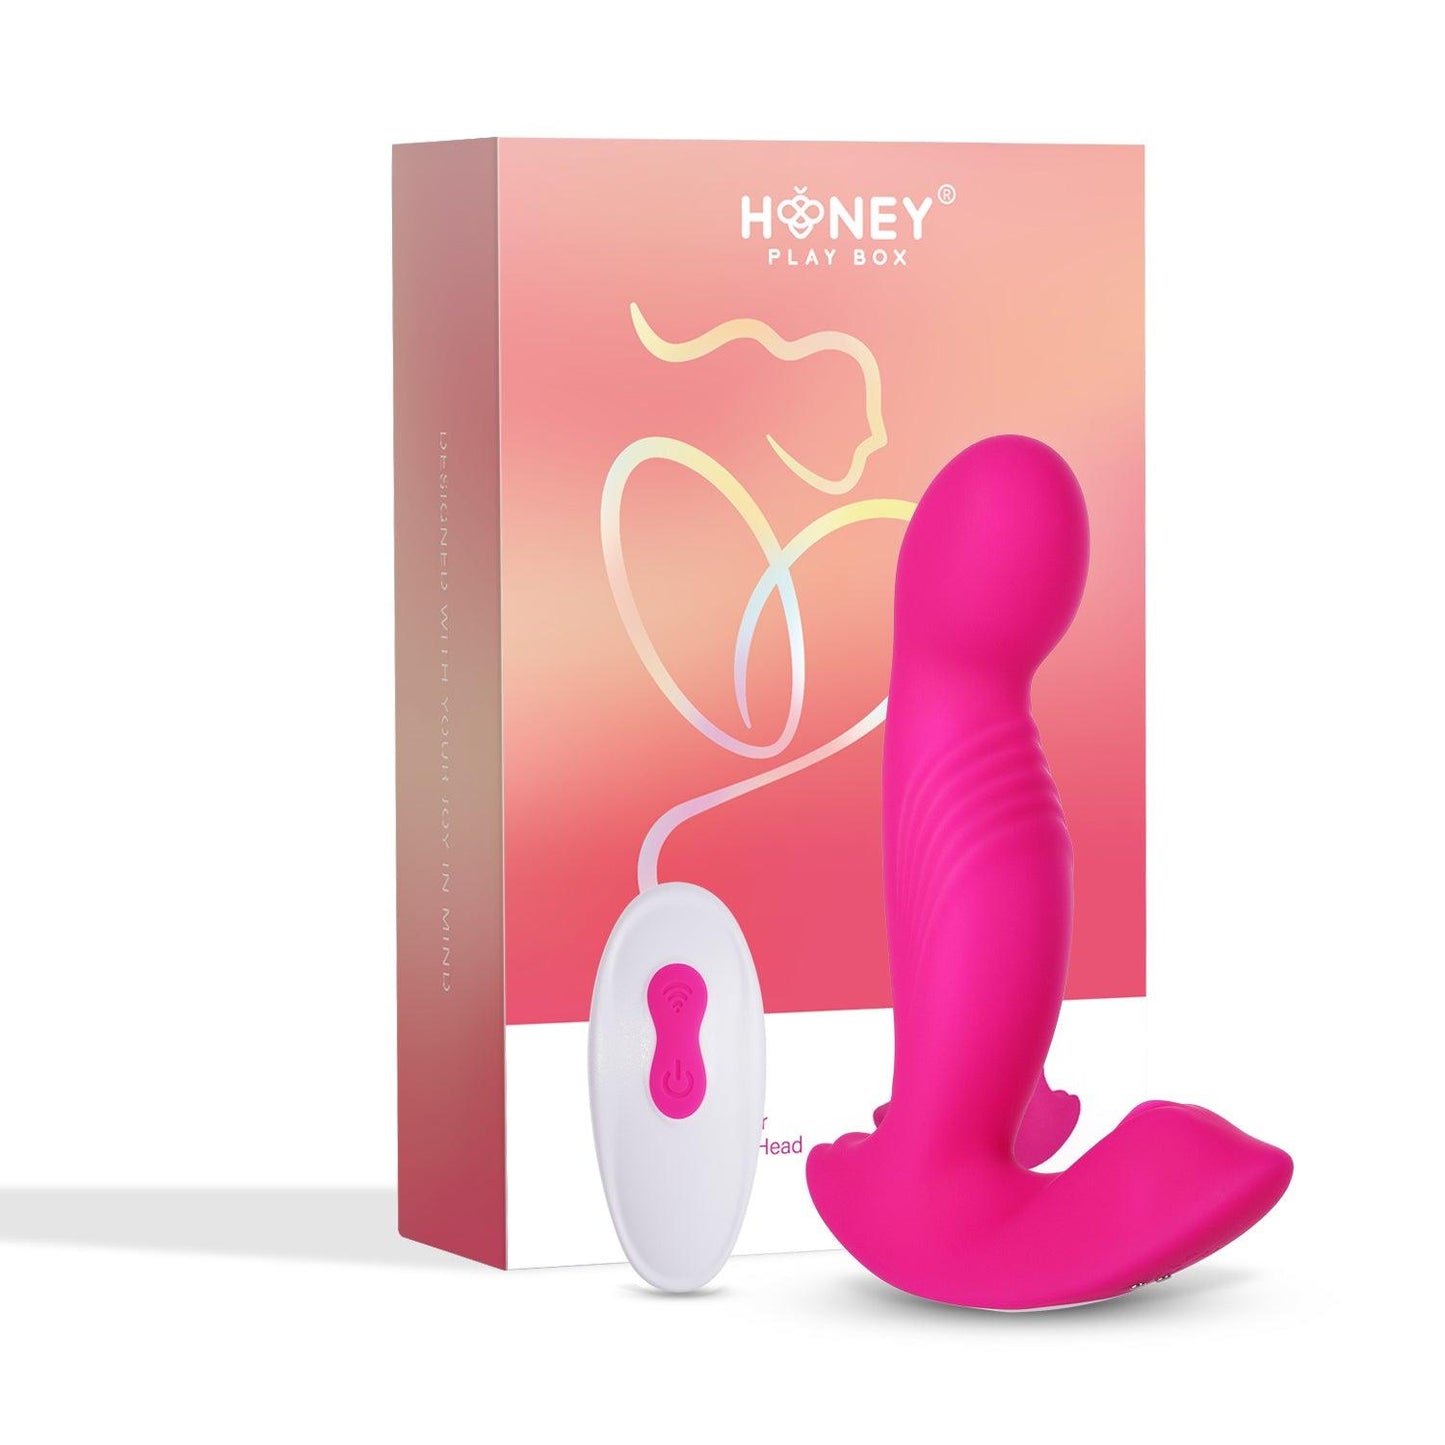 Crave - G-spot Vibrator with Rotating Head G-bliss O-maker Toy